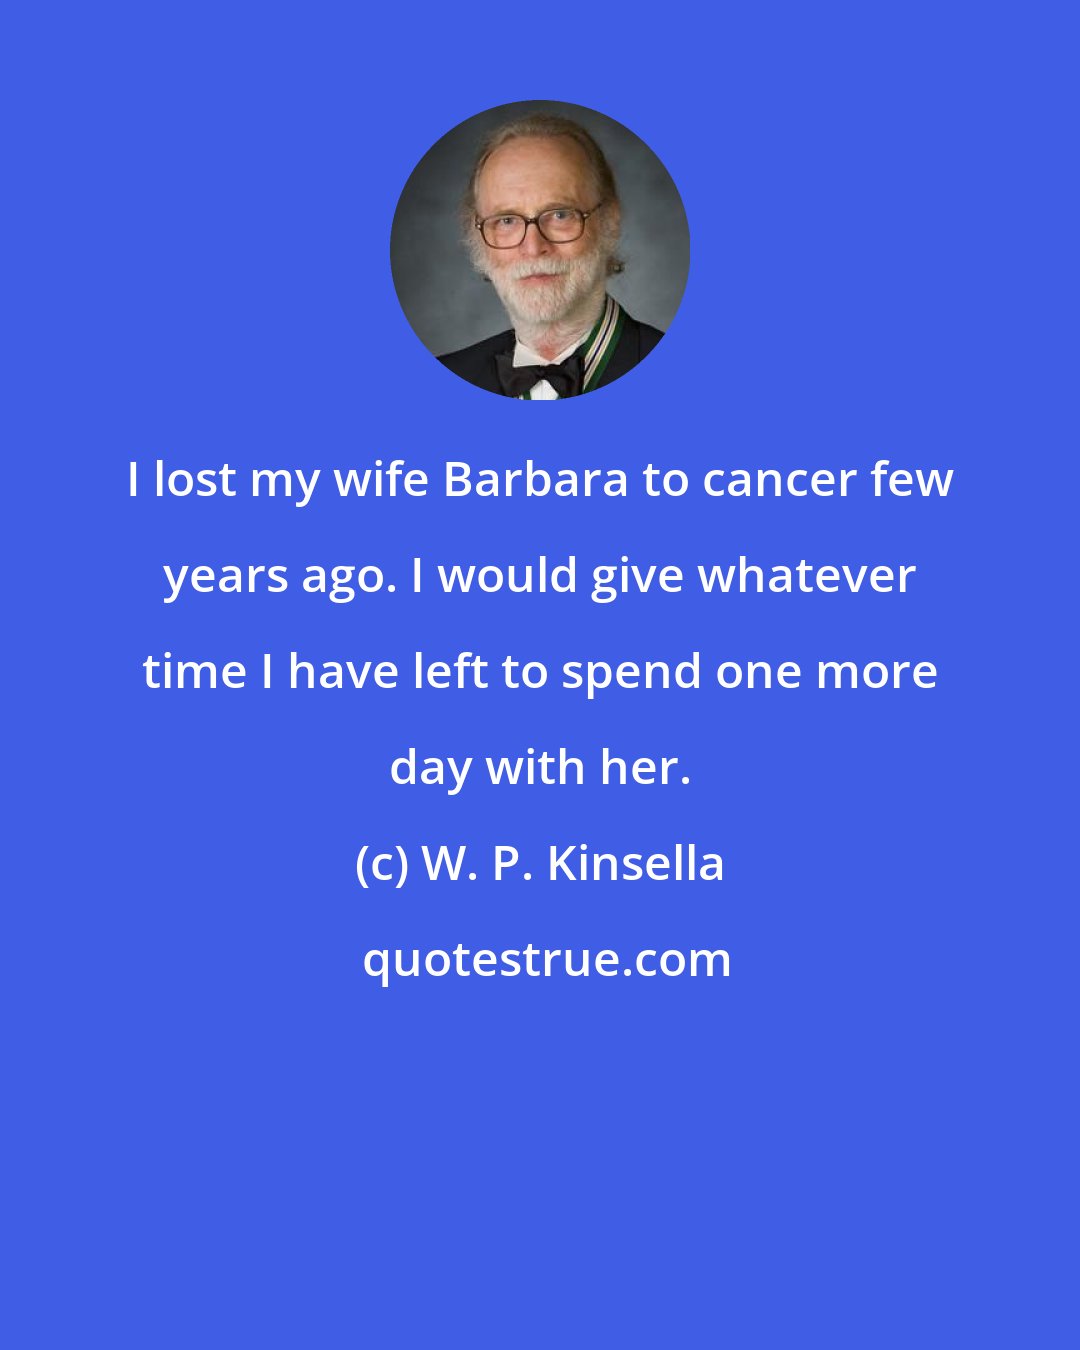 W. P. Kinsella: I lost my wife Barbara to cancer few years ago. I would give whatever time I have left to spend one more day with her.